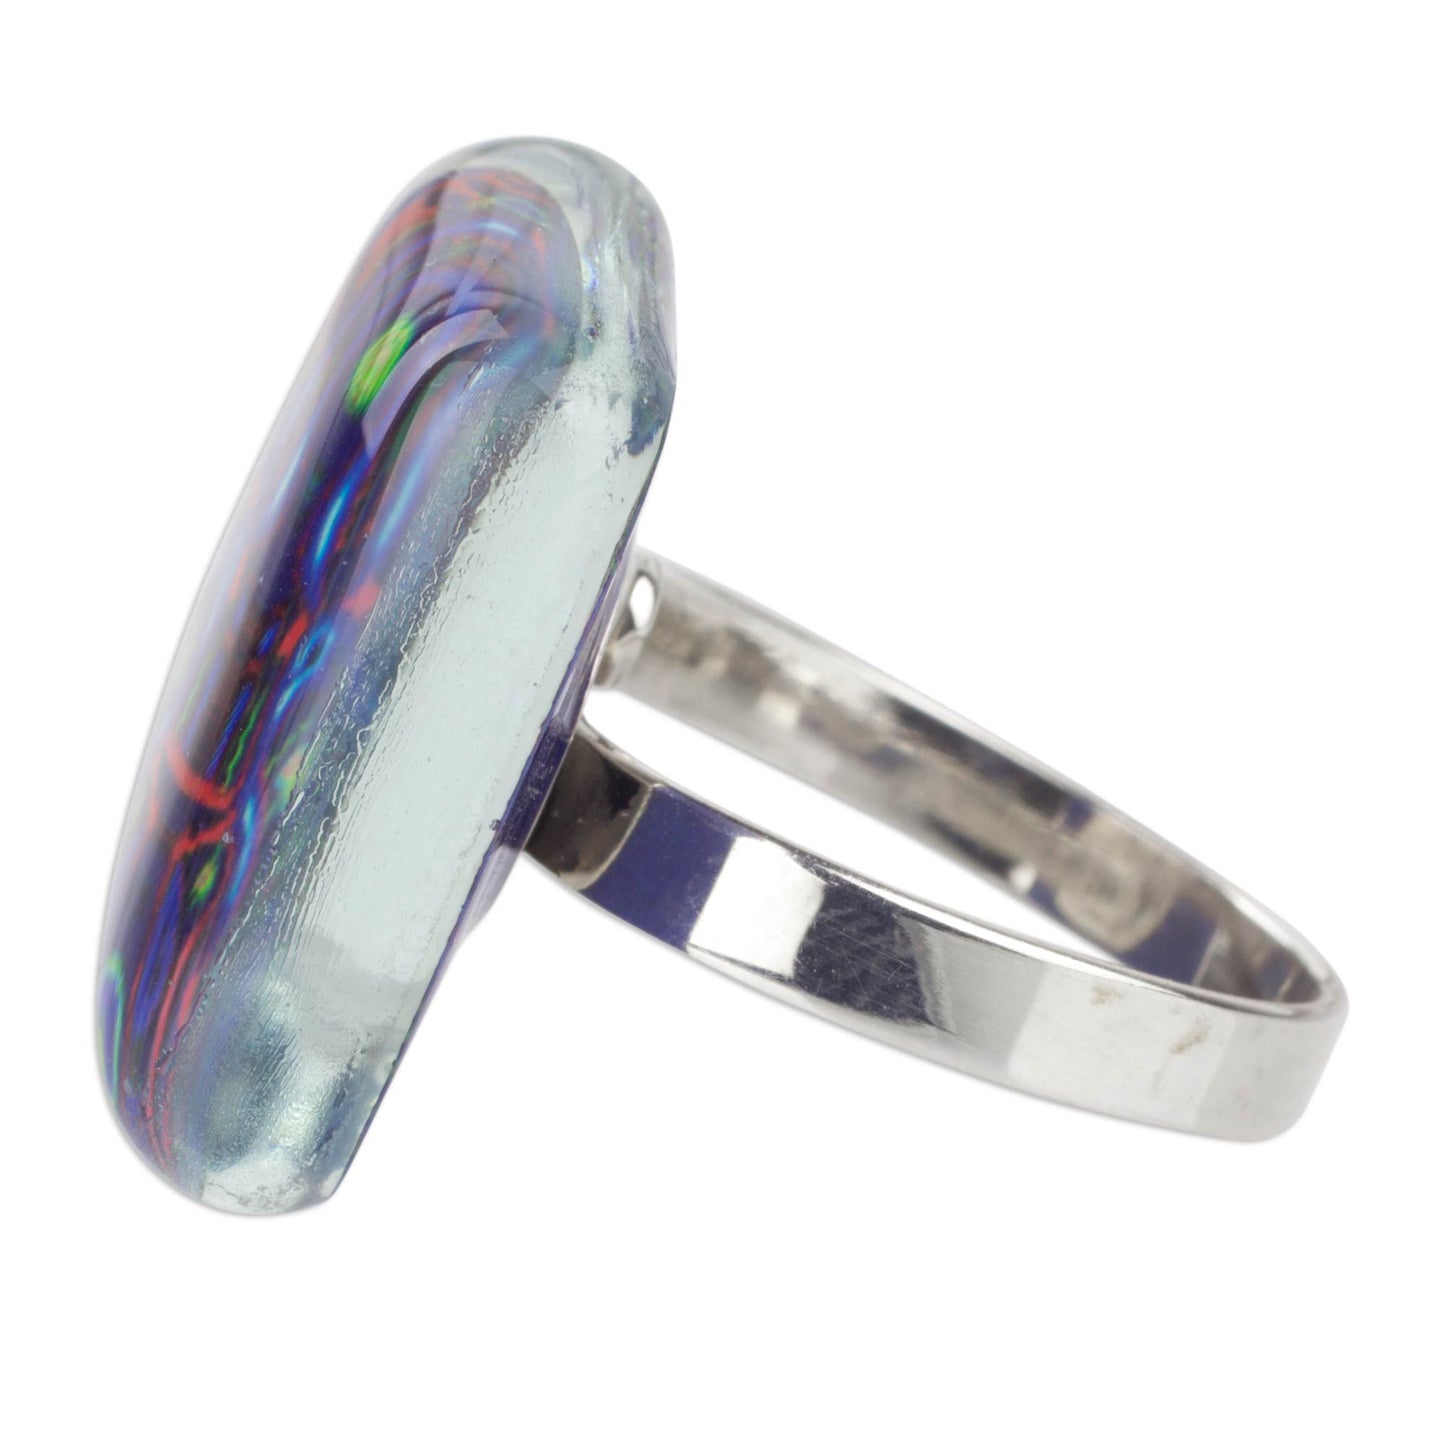 'Blue Huichol' 925 Silver Cocktail Ring with Art Glass